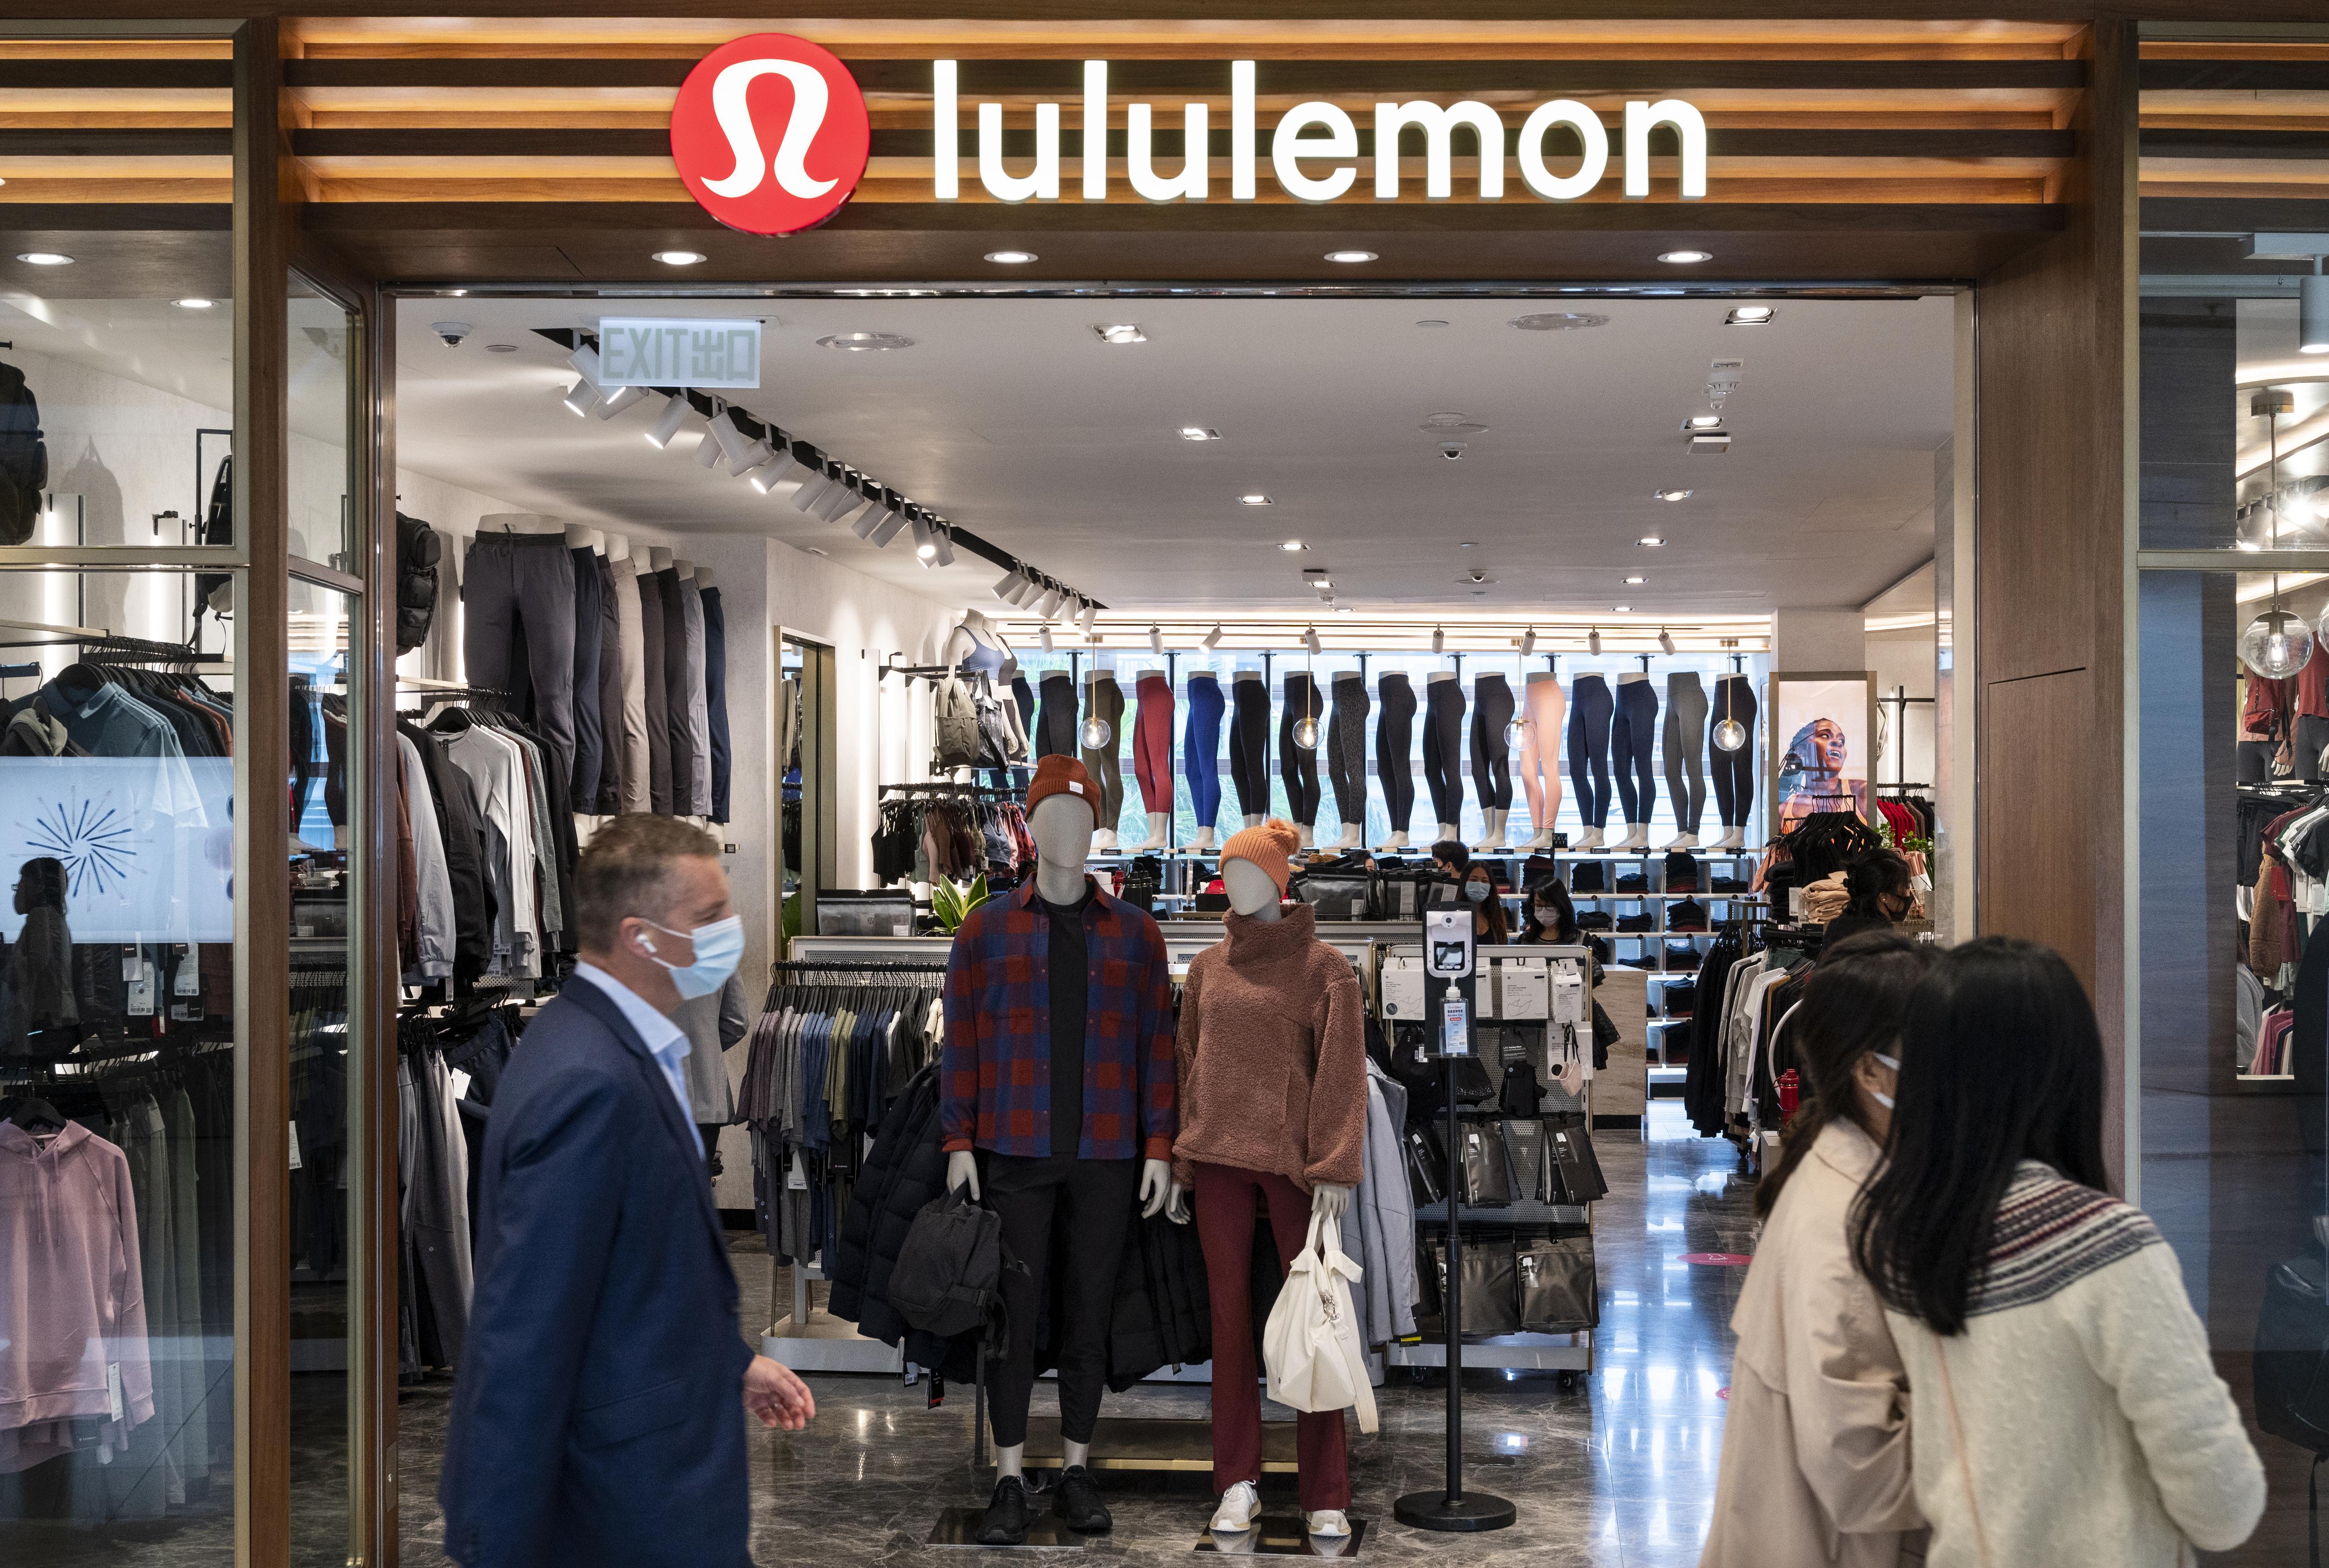 Lululemon will pay you up to $25 for your used clothes